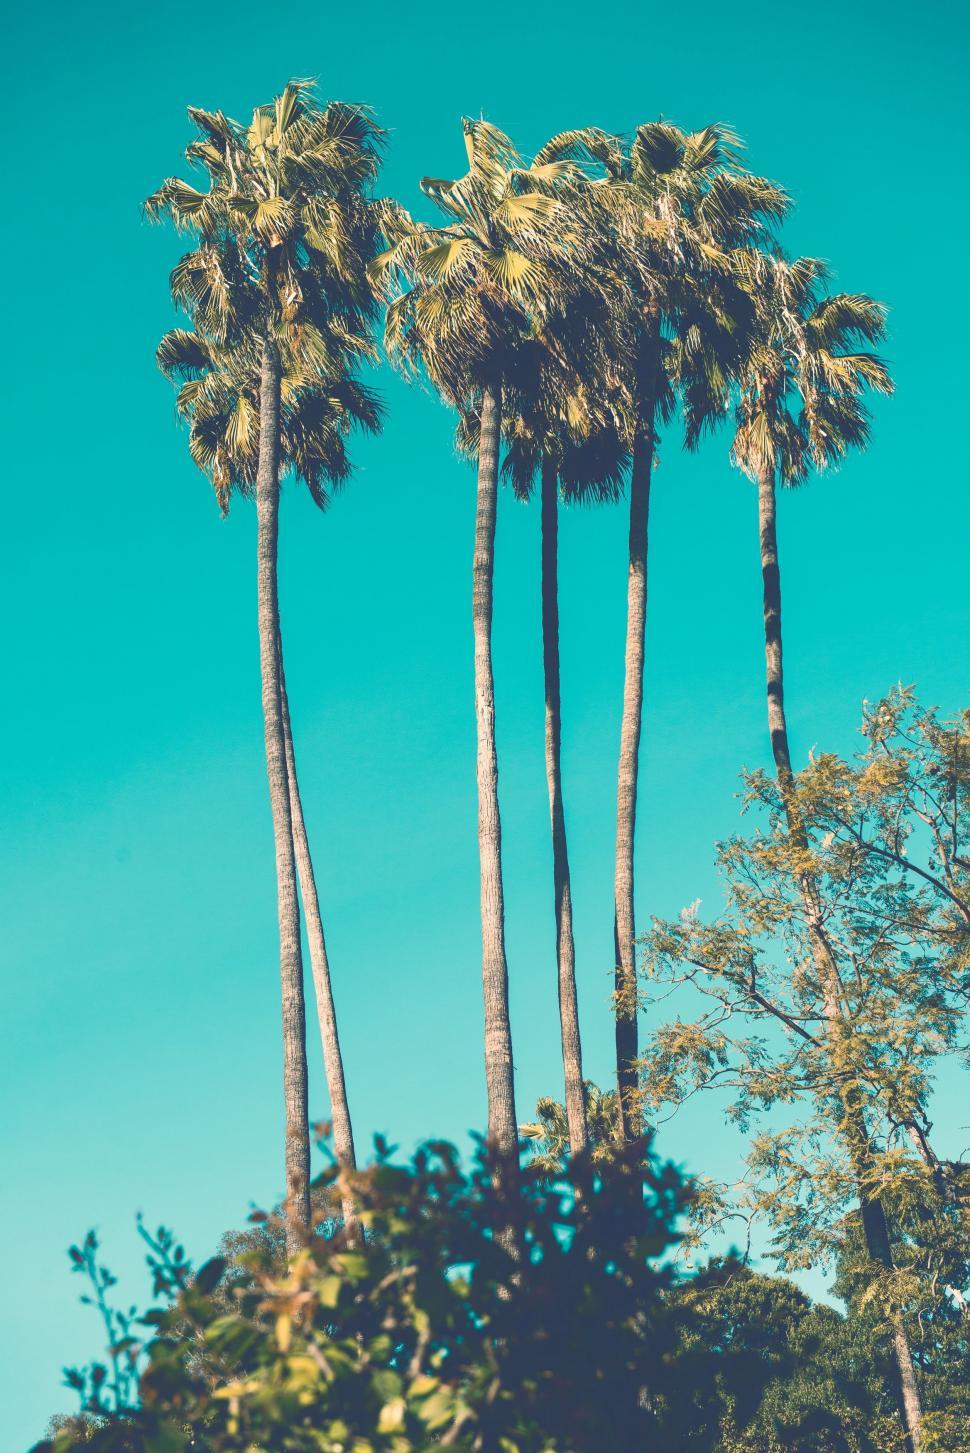 Free Image of Group of Palm Trees Against Blue Sky 